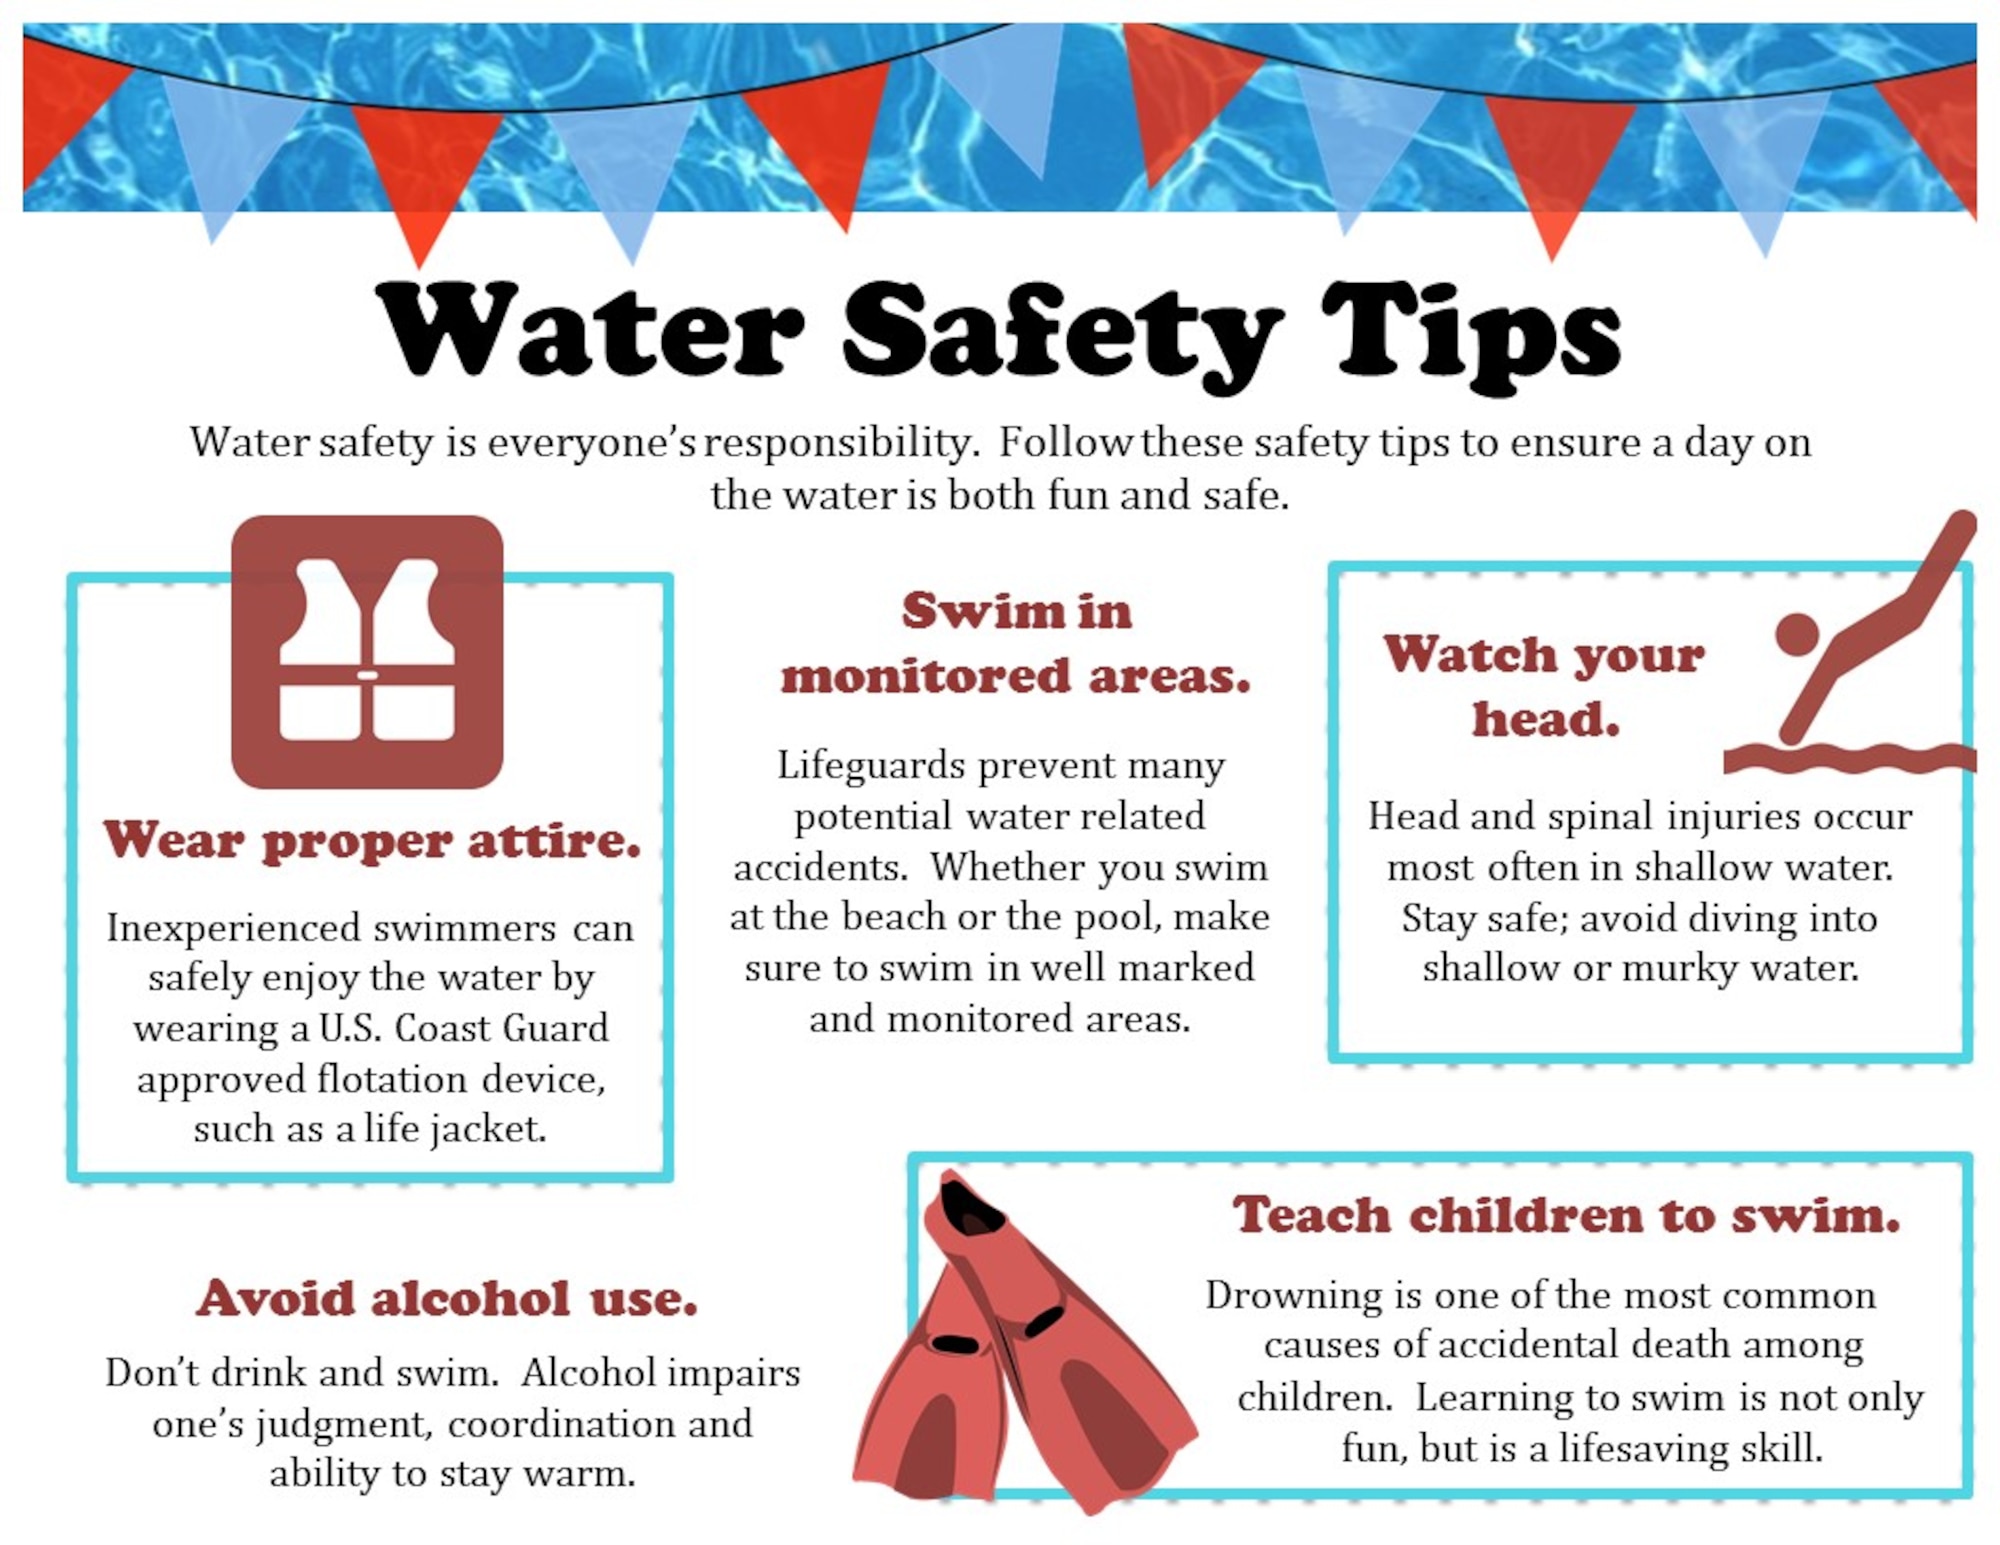 Safety must be the top priority for service members and their families at MacDill Air Force Base, Florida.  Follow these tips to ensure a day at the beach or the pool is both fun and safe.